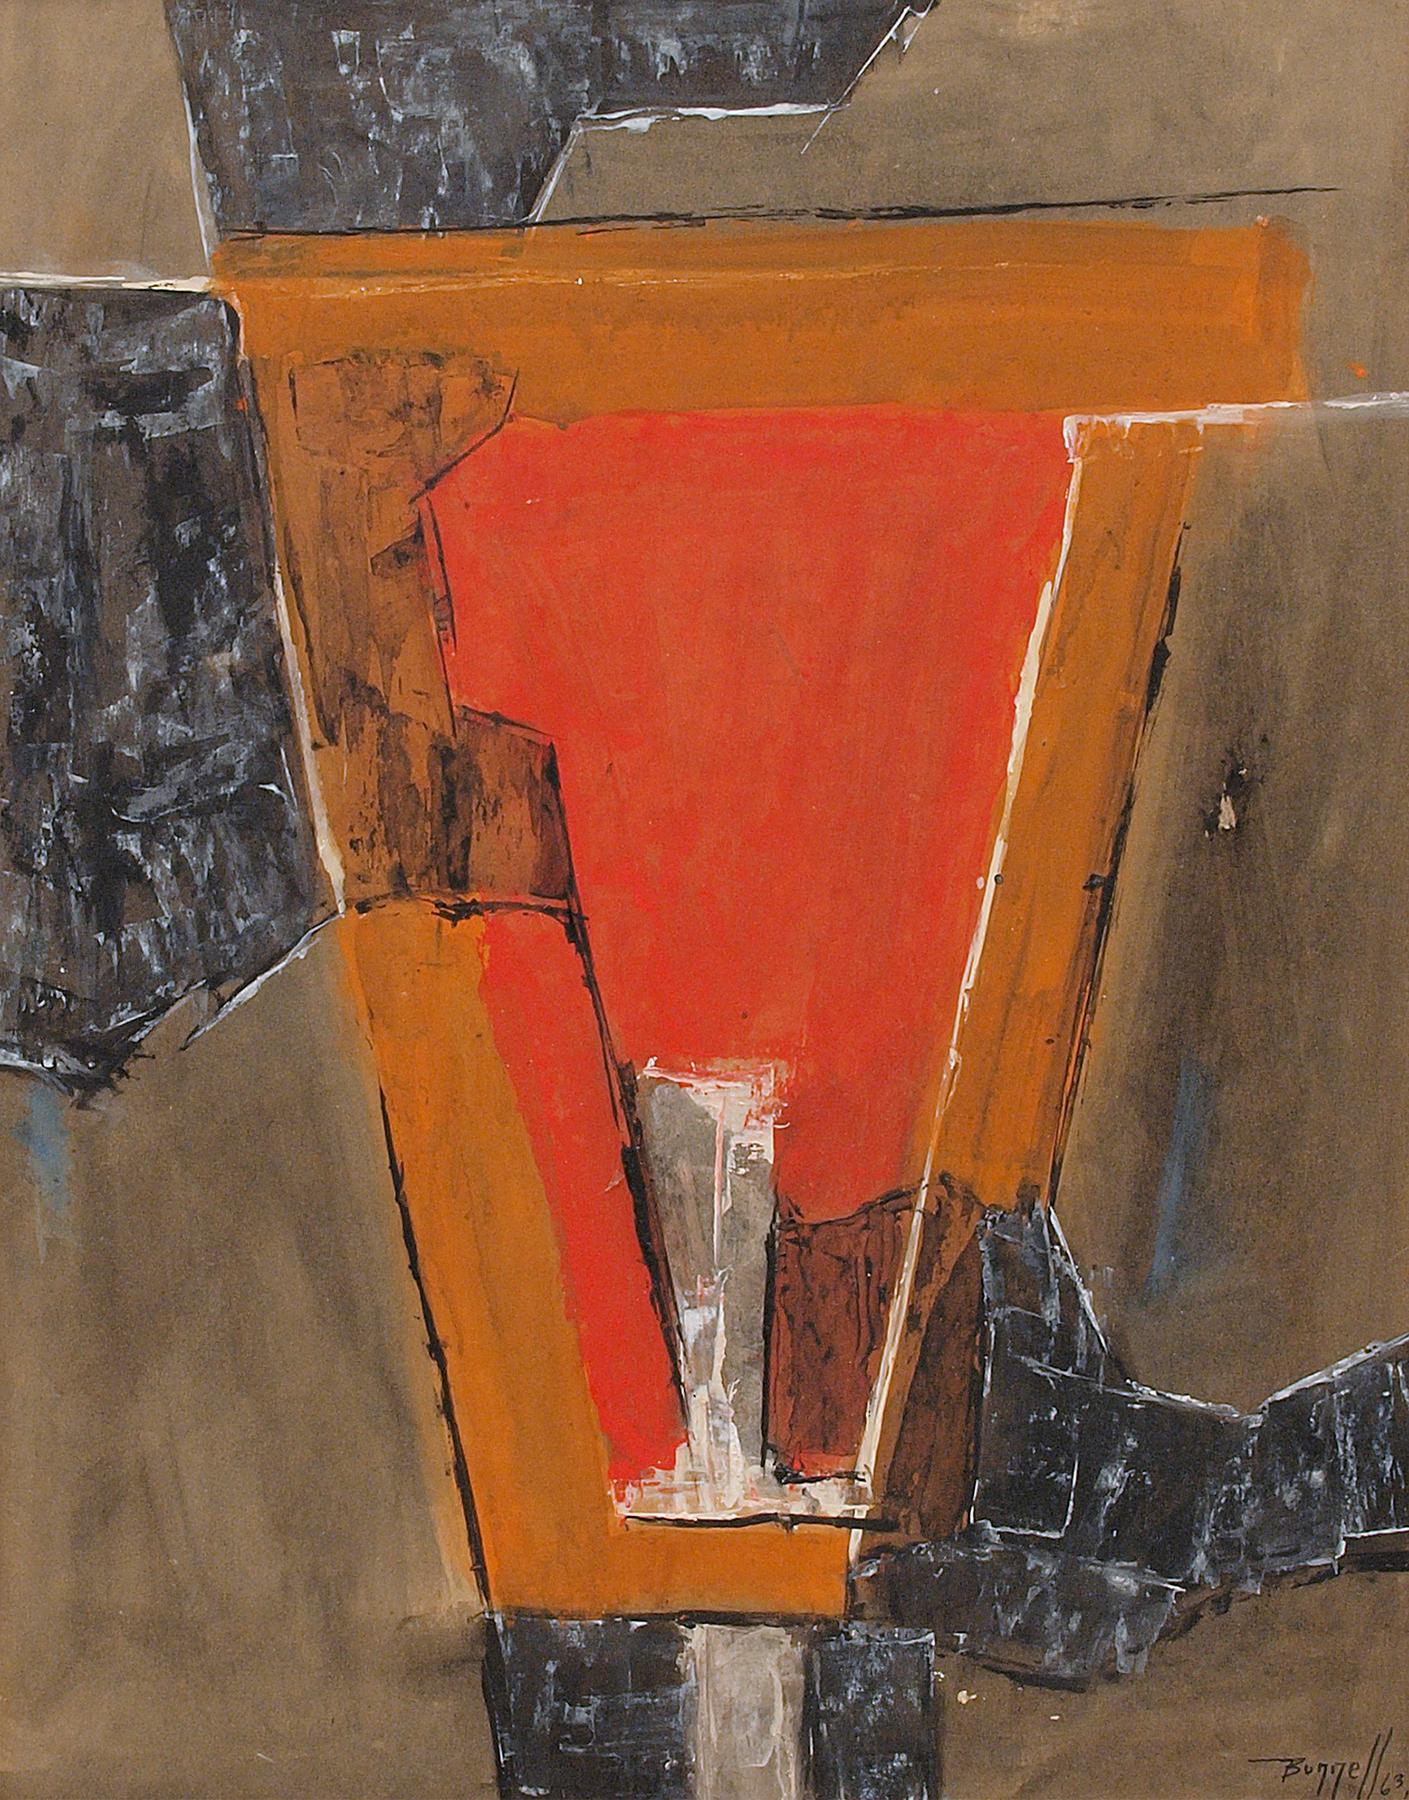 Abstract oil on board signed by Charles Ragland Bunnell (1897-1968) titled 'Bull III' painted in 1963. Presented in the artist’s original frame, outer dimensions measure 27 ½ x 23 ½ x 1 ¼ inches. Image size is 20 x 16 inches.
	
Provenance: Estate of